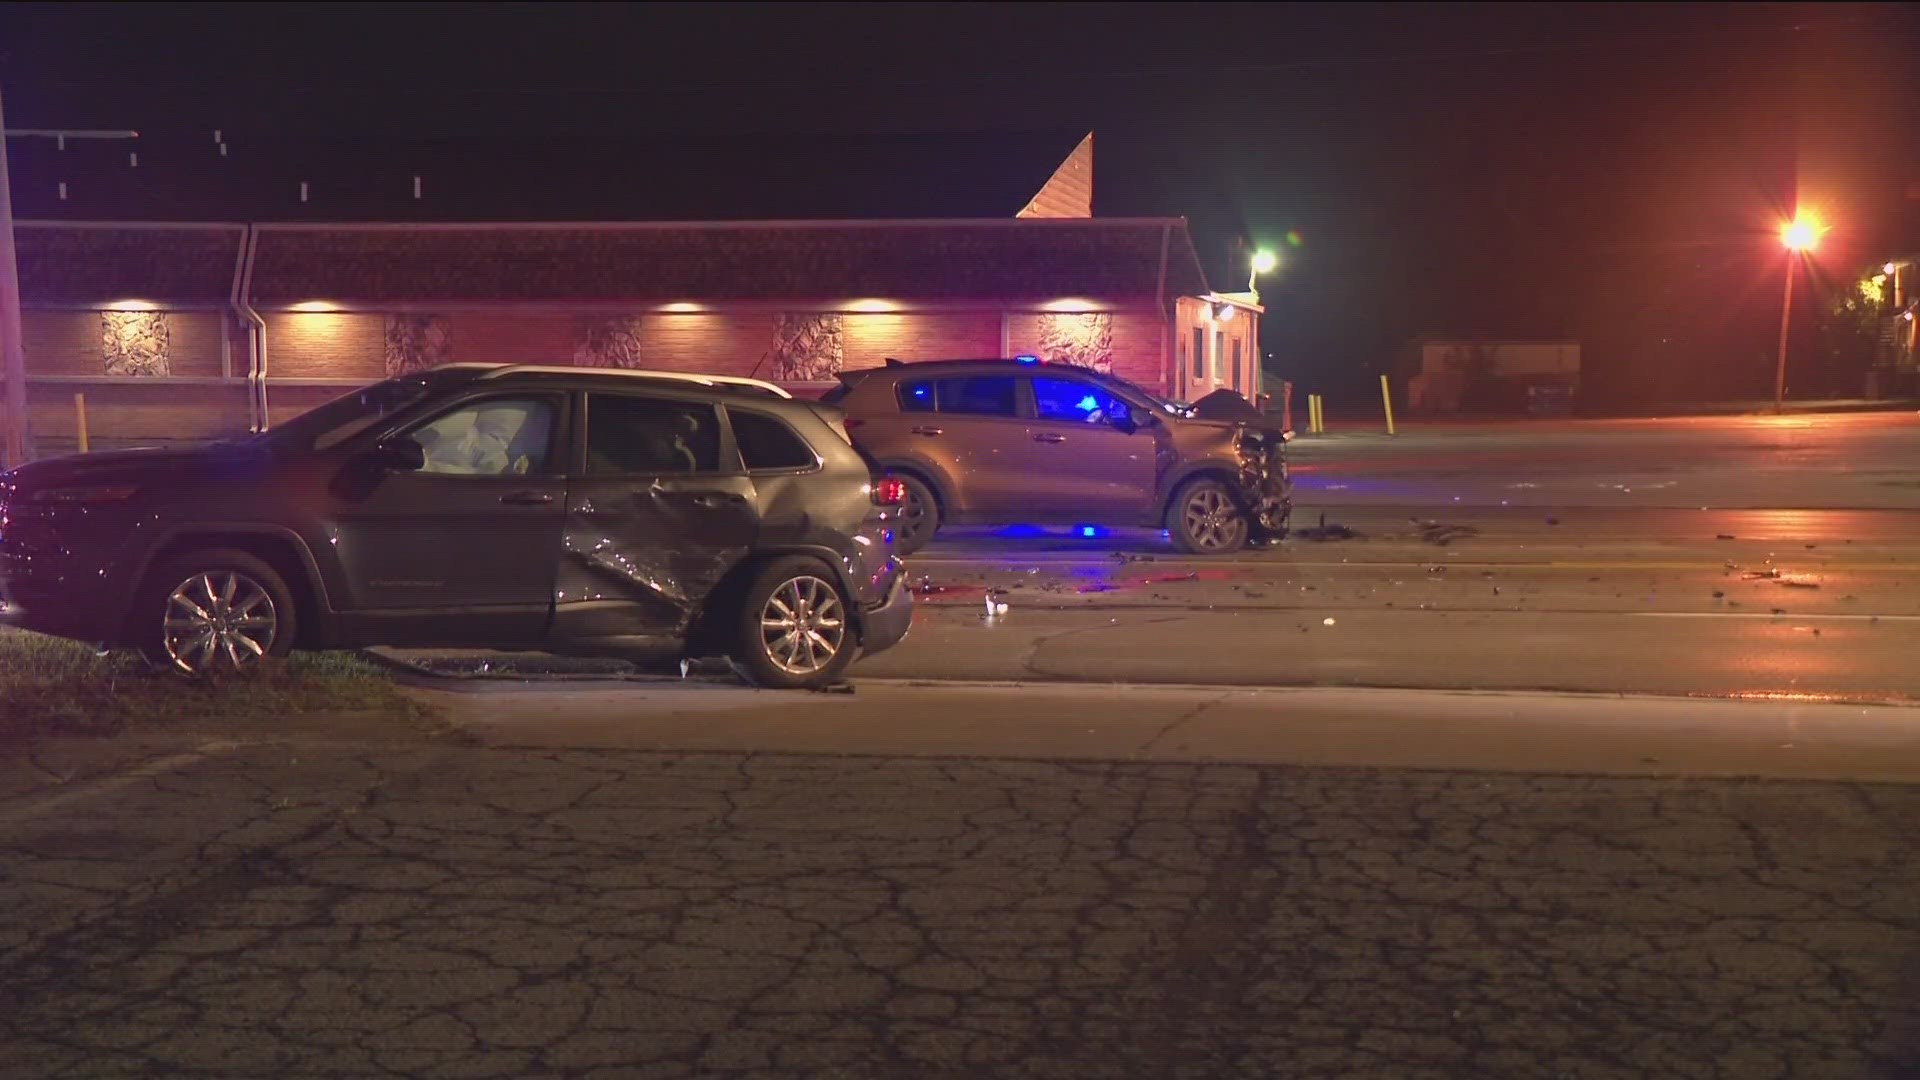 TPD at the scene told WTOL 11 there was a crash involving two cars, a pedestrian then ran over to check on the people involved and was struck by another vehicle.